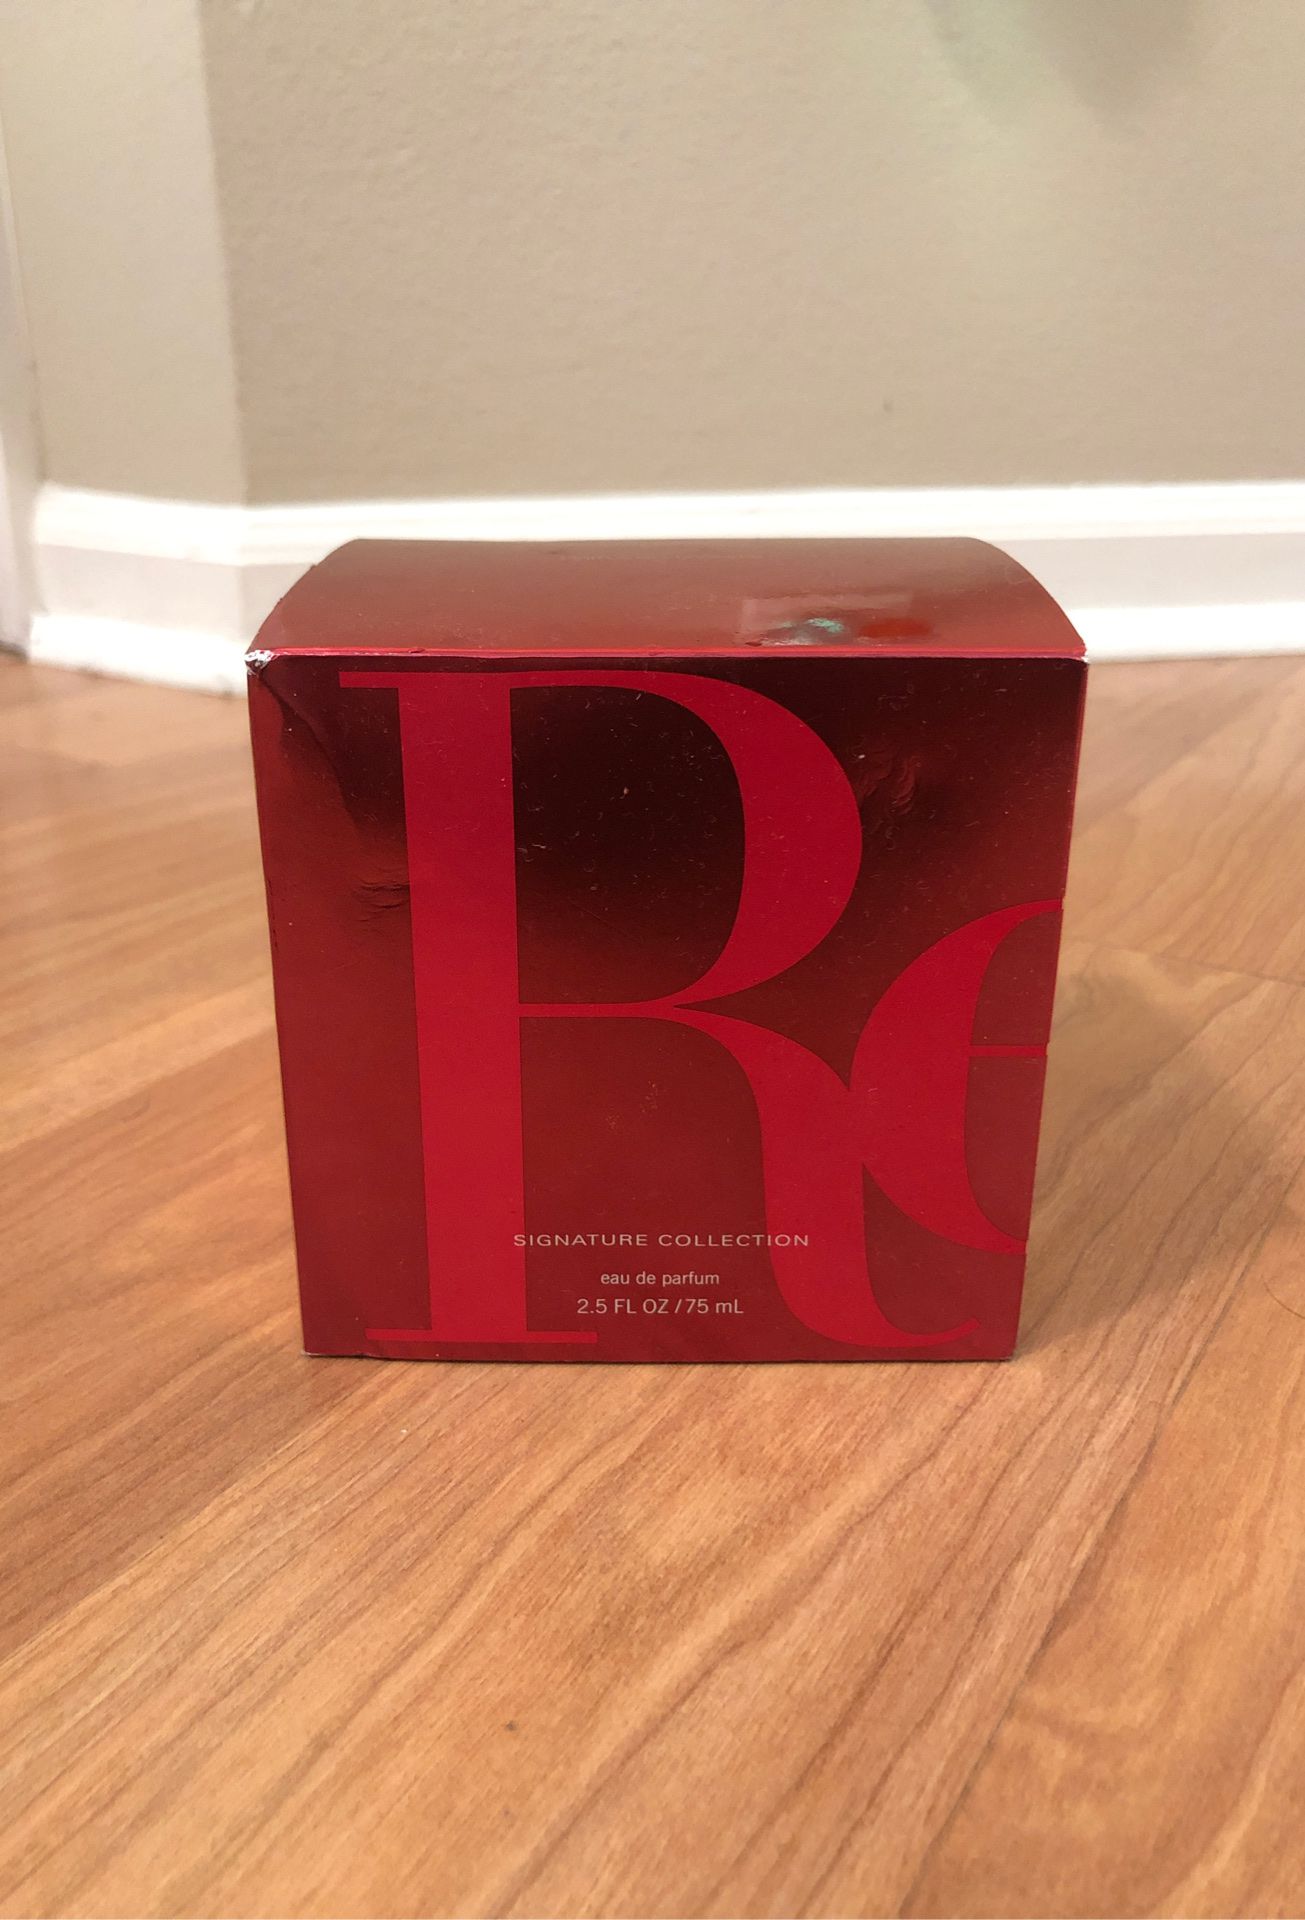 Discontinued “Forever red” perfume by bath and body works